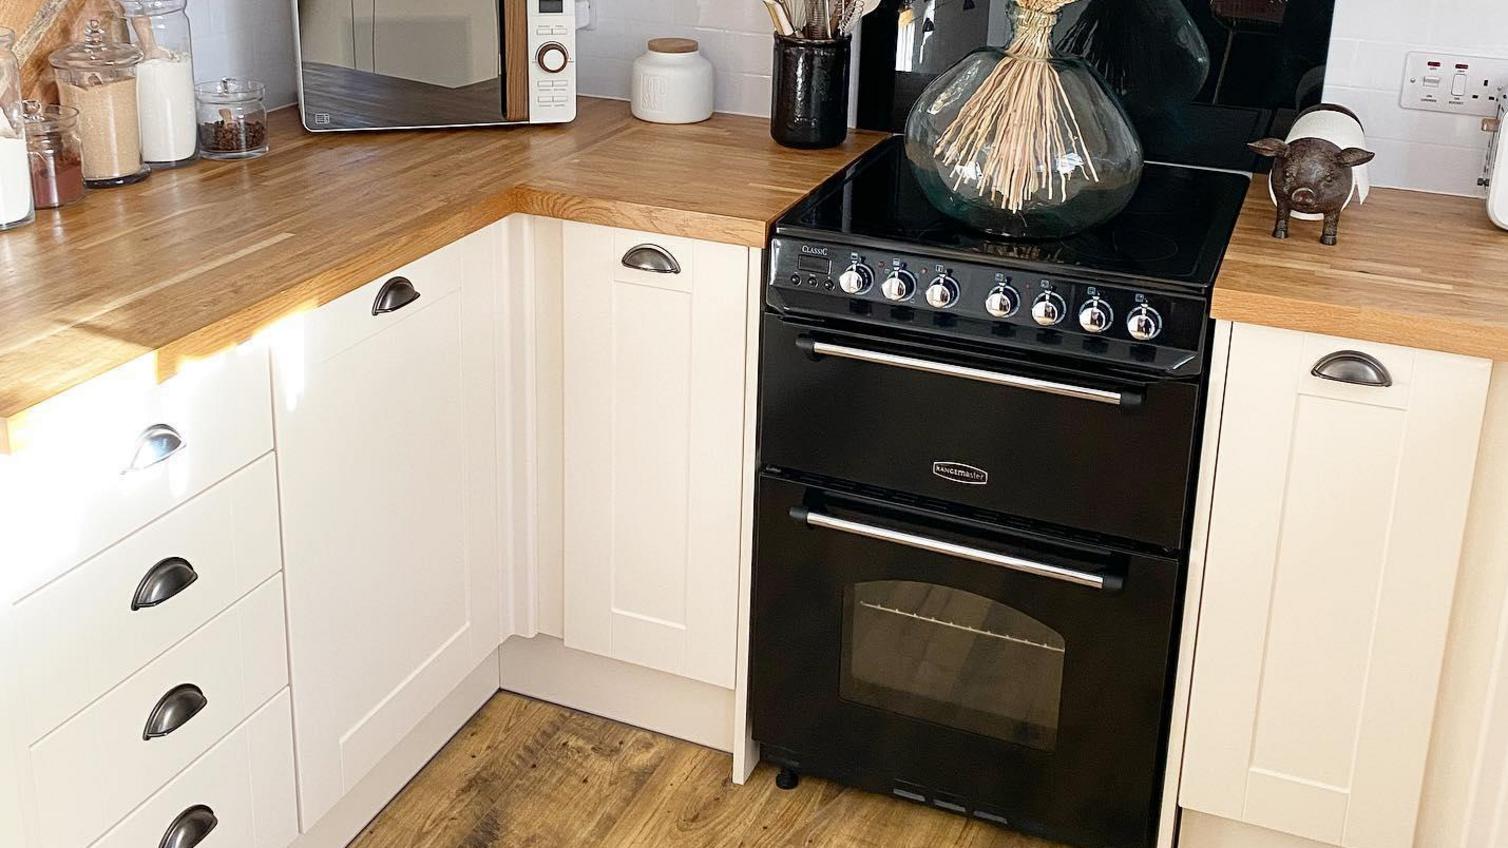 Cream shaker kitchen in a u-shaped layout with brass cup handles, wood flooring and wood worktops.